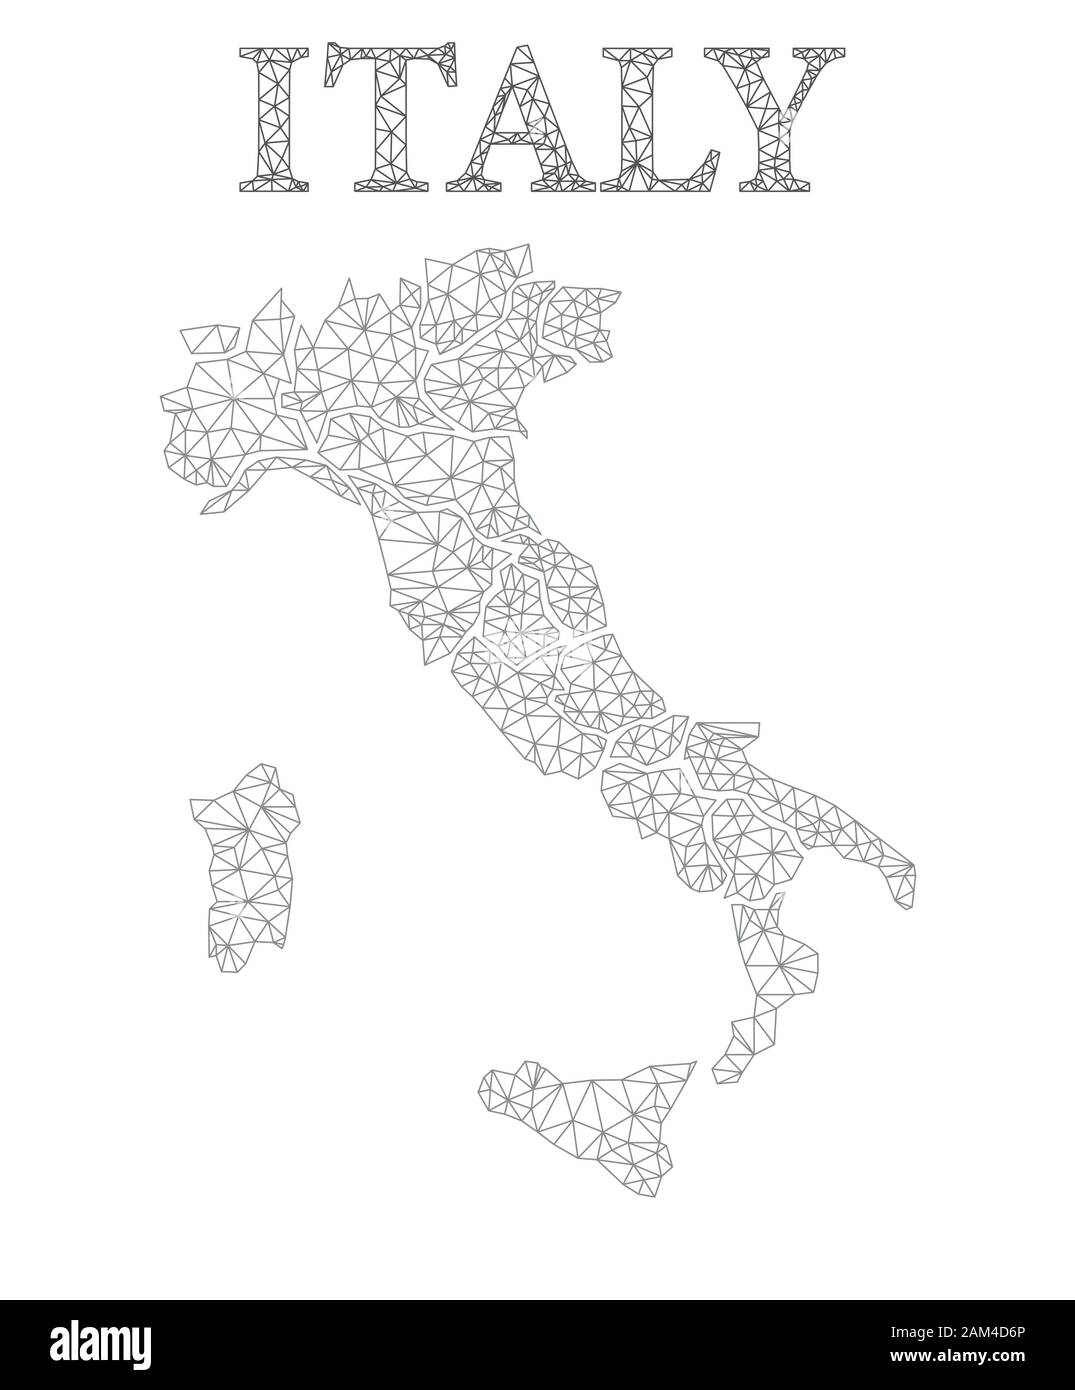 Lowpoly Map of Italy Stock Vector